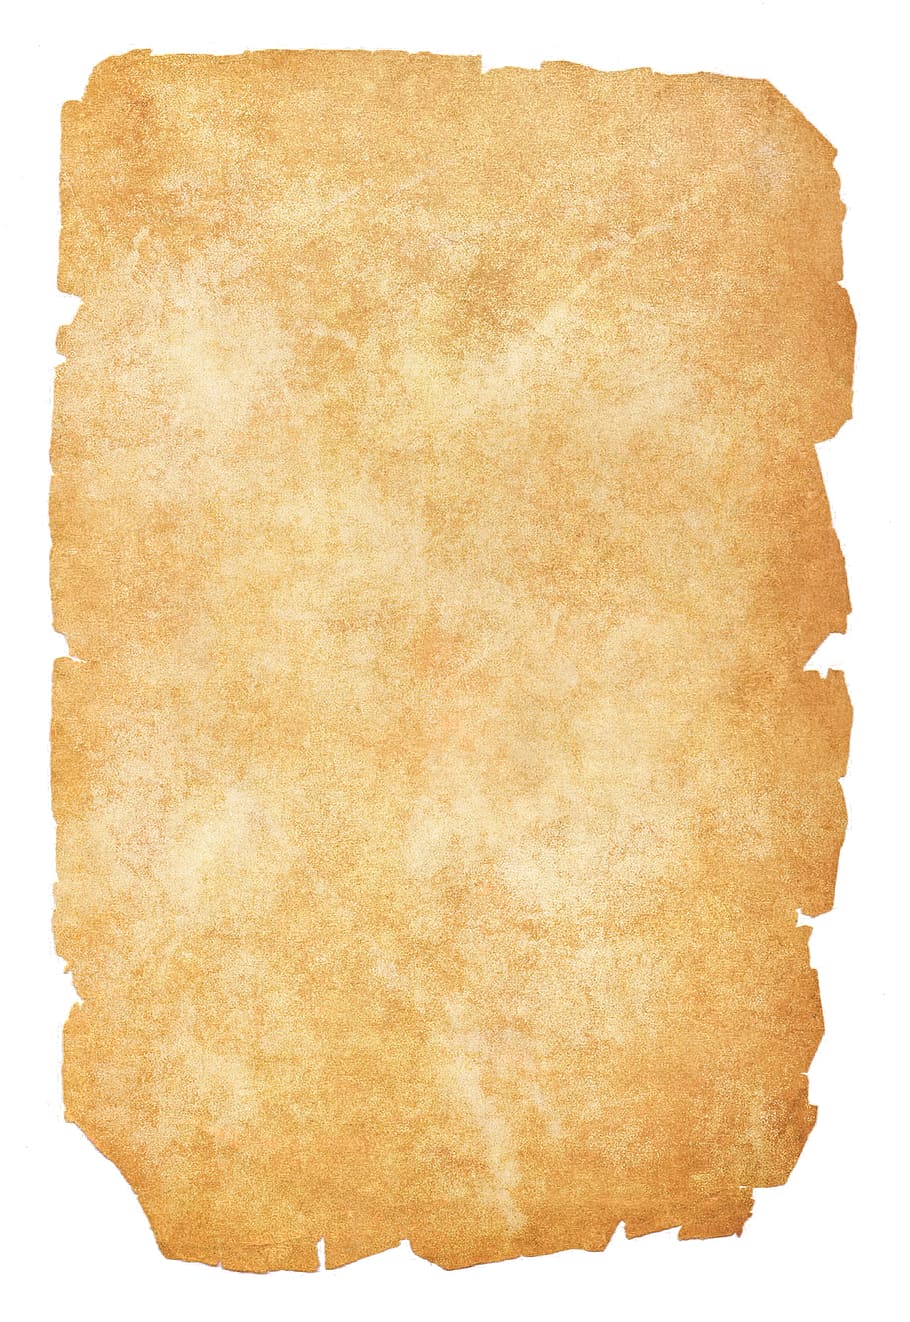 aged, background, closeup, isolated, paper, texture, textured